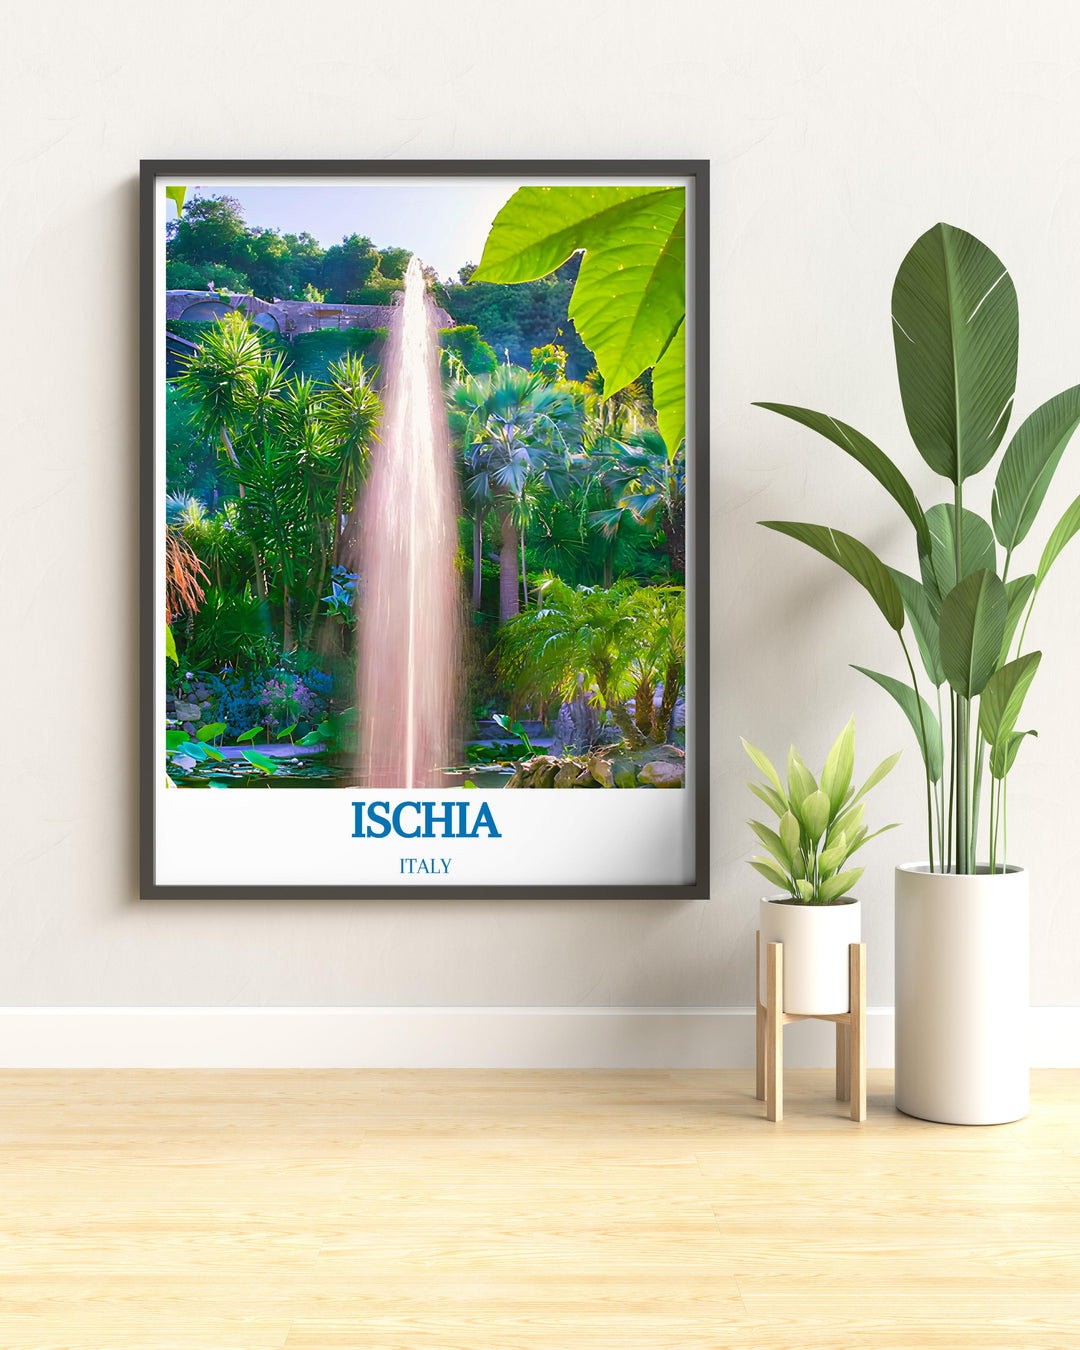 Vintage poster of Ischia with artistic renderings of historic sites perfect for collectors of Italian art